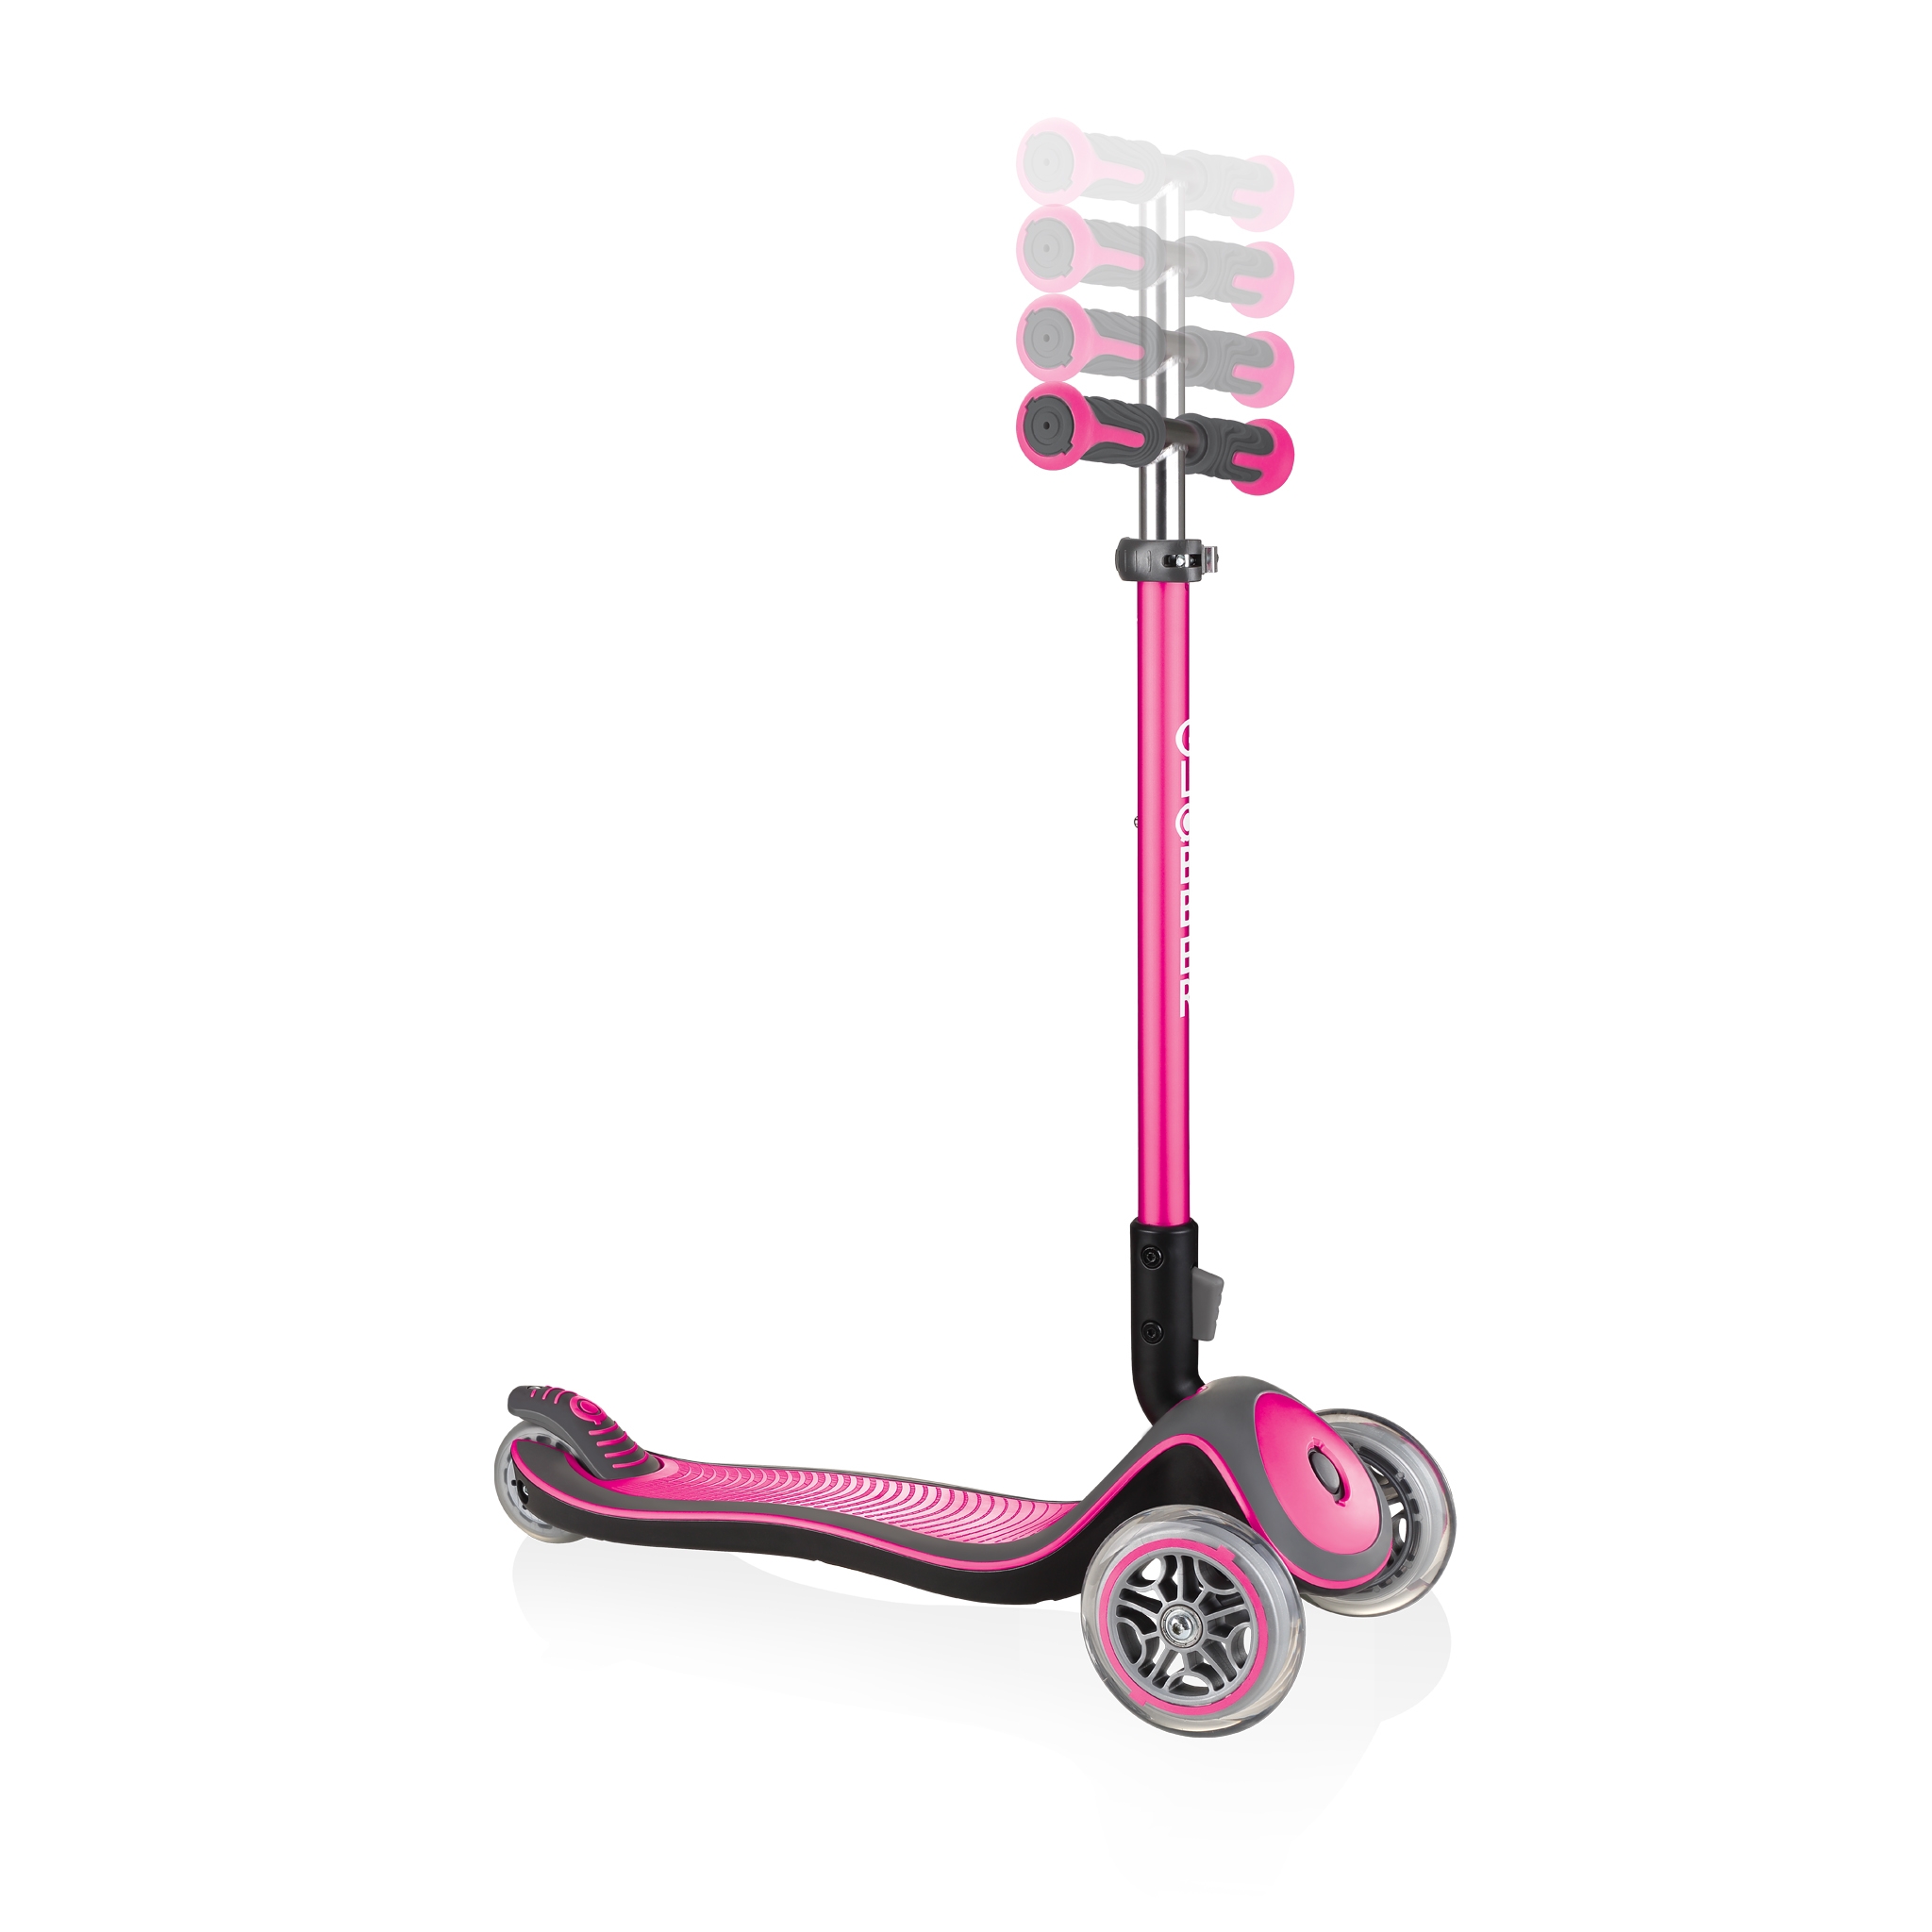 Globber-ELITE-DELUXE-3-wheel-adjustable-scooter-for-kids-with-anodized-T-bar-deep-pink 1